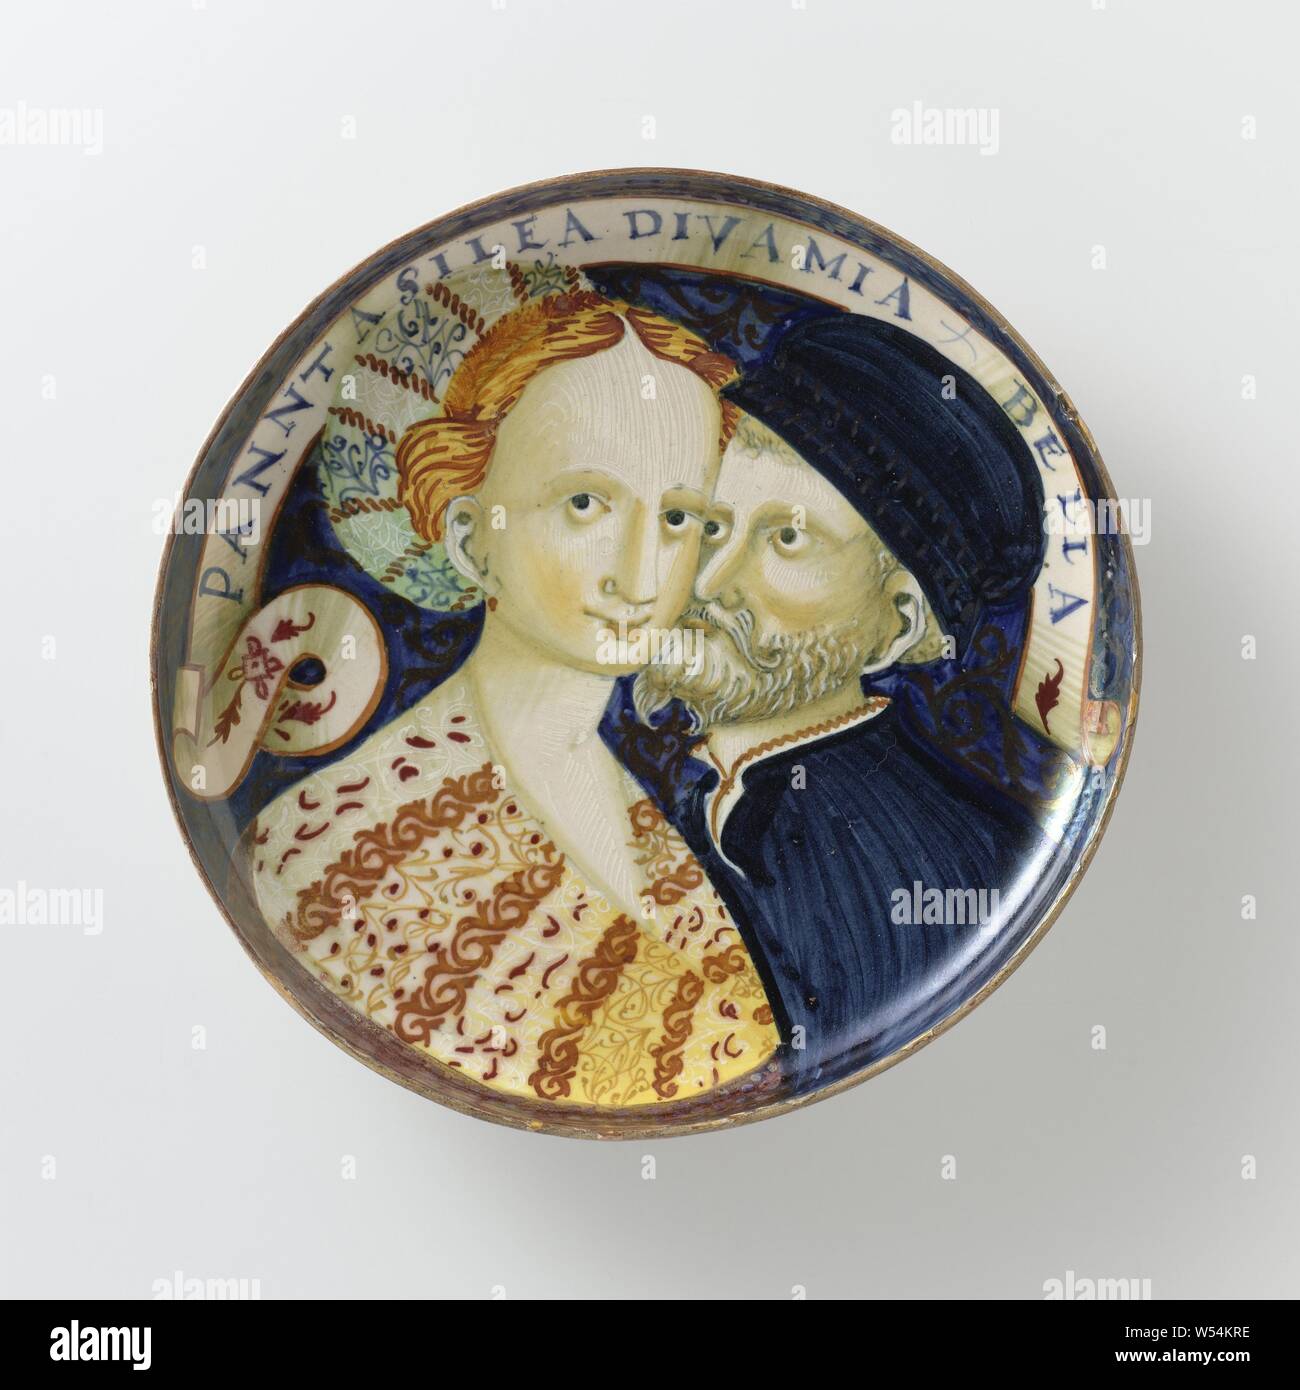 Dish with a man and a woman, Dish on foot with portrait of a man and a woman with the inscription: PANNTASILEA DIVA MIA BELLA, Dish on foot of multi-colored majolica. Painted on blue ground with the busts of a young woman and a bearded man. Both are wearing hats. The women's clothing is richly decorated. Along the upper edge runs a banderolle with the inscription 'PANNTASILEA DIVA MIA BELLA' (Penthesileia, my divine beauty). The bowl is provided with extra decoration in metal luster in gold and red, couple or lovers, anonymous, c. 1530 - c. 1540, earthenware, tin glaze, lead glaze, luster Stock Photo